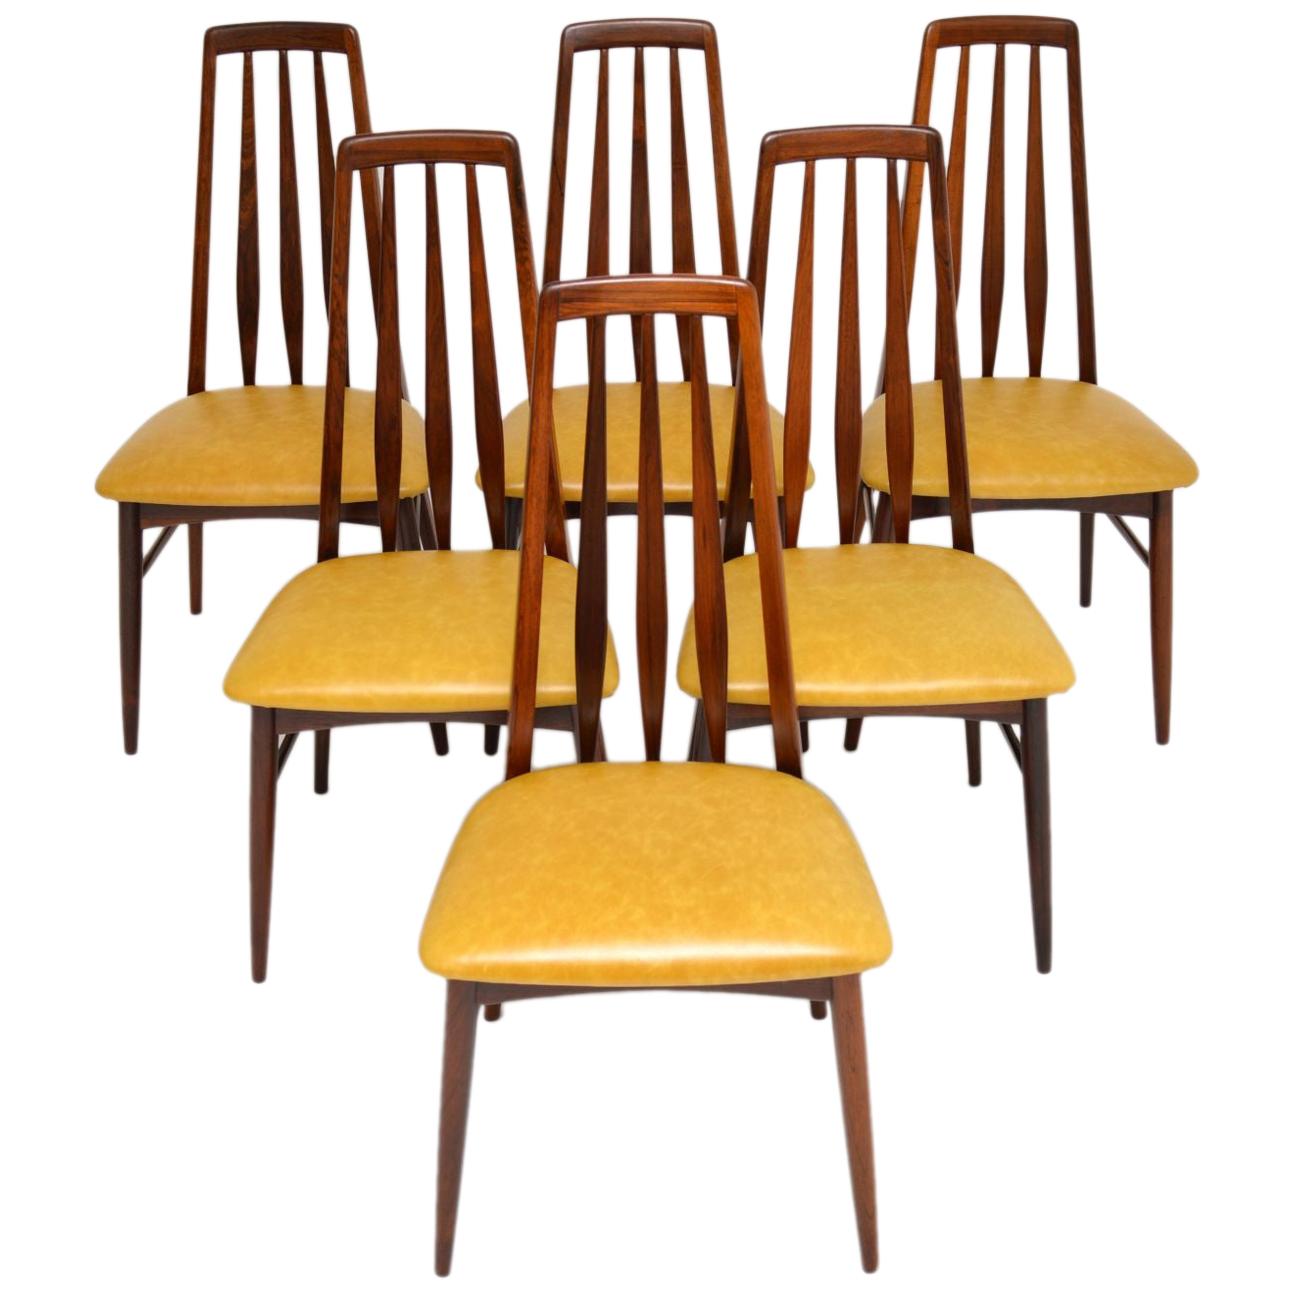 Set of 6 Danish Dining Chairs by Niels Koefoed